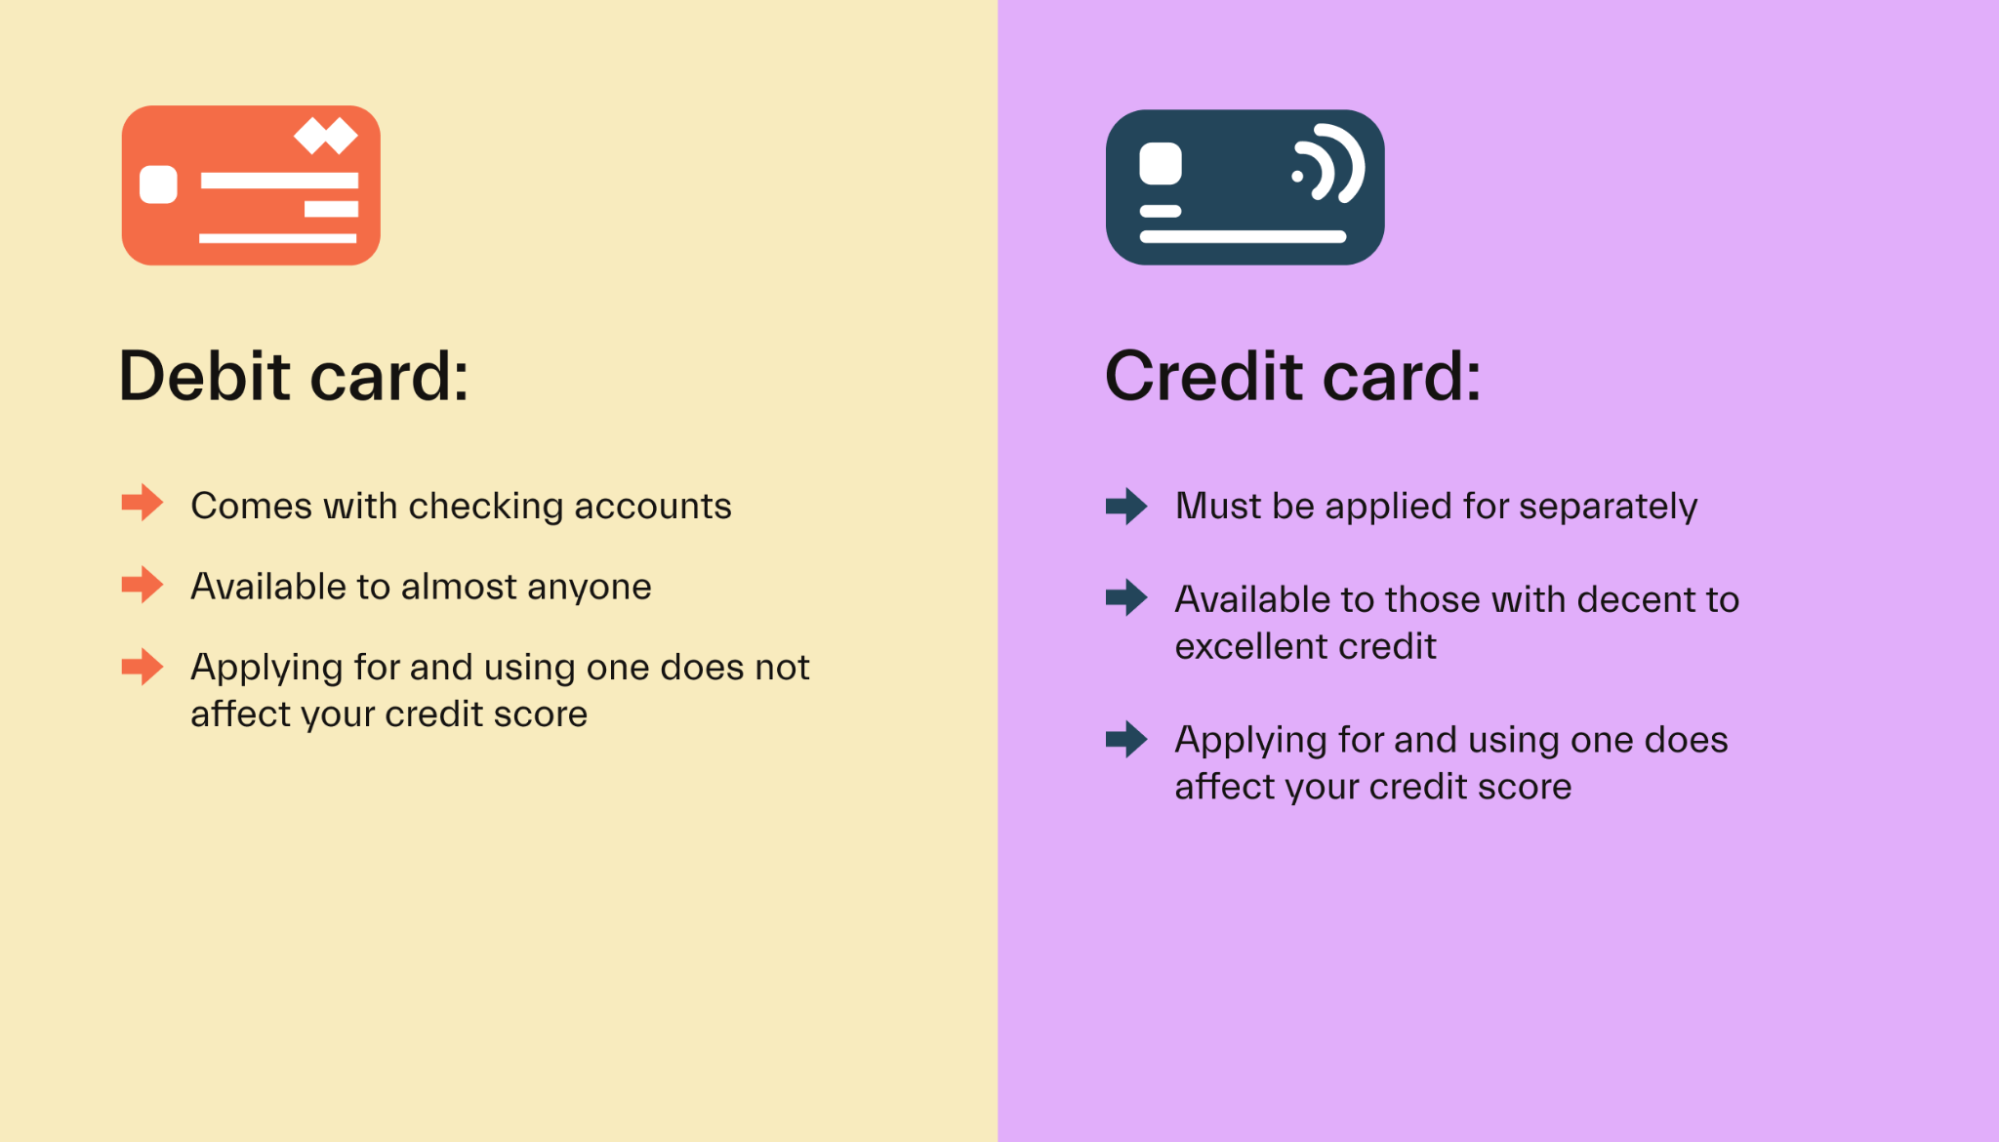 Credit card eligibility